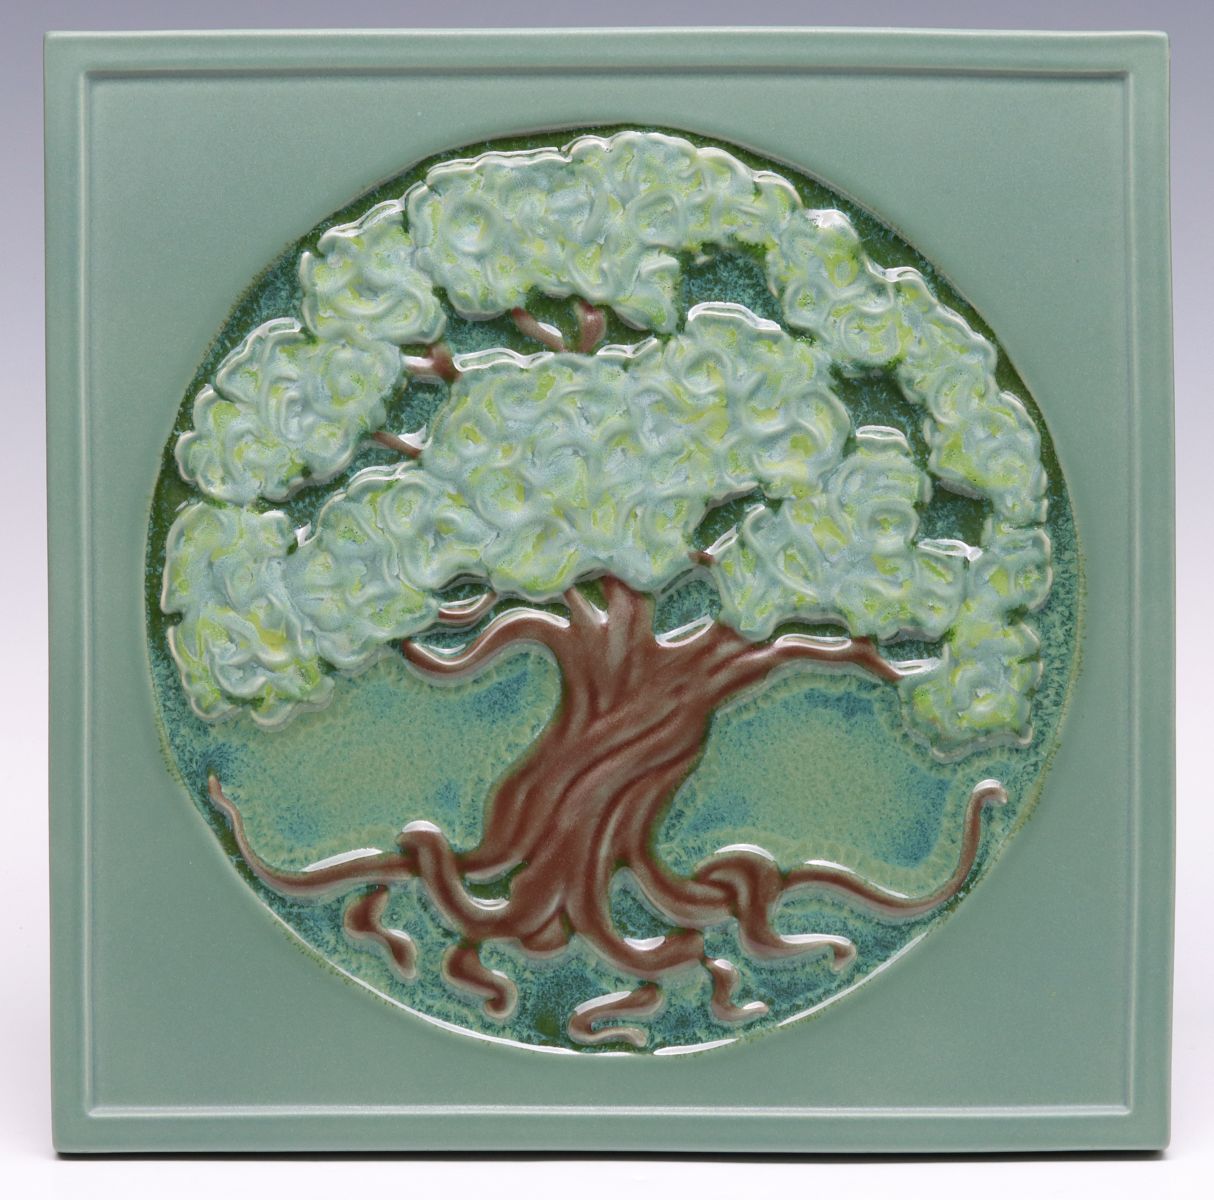 A CONTEMPORARY ROOKWOOD ART POTTERY TREE OF LIFE TILE